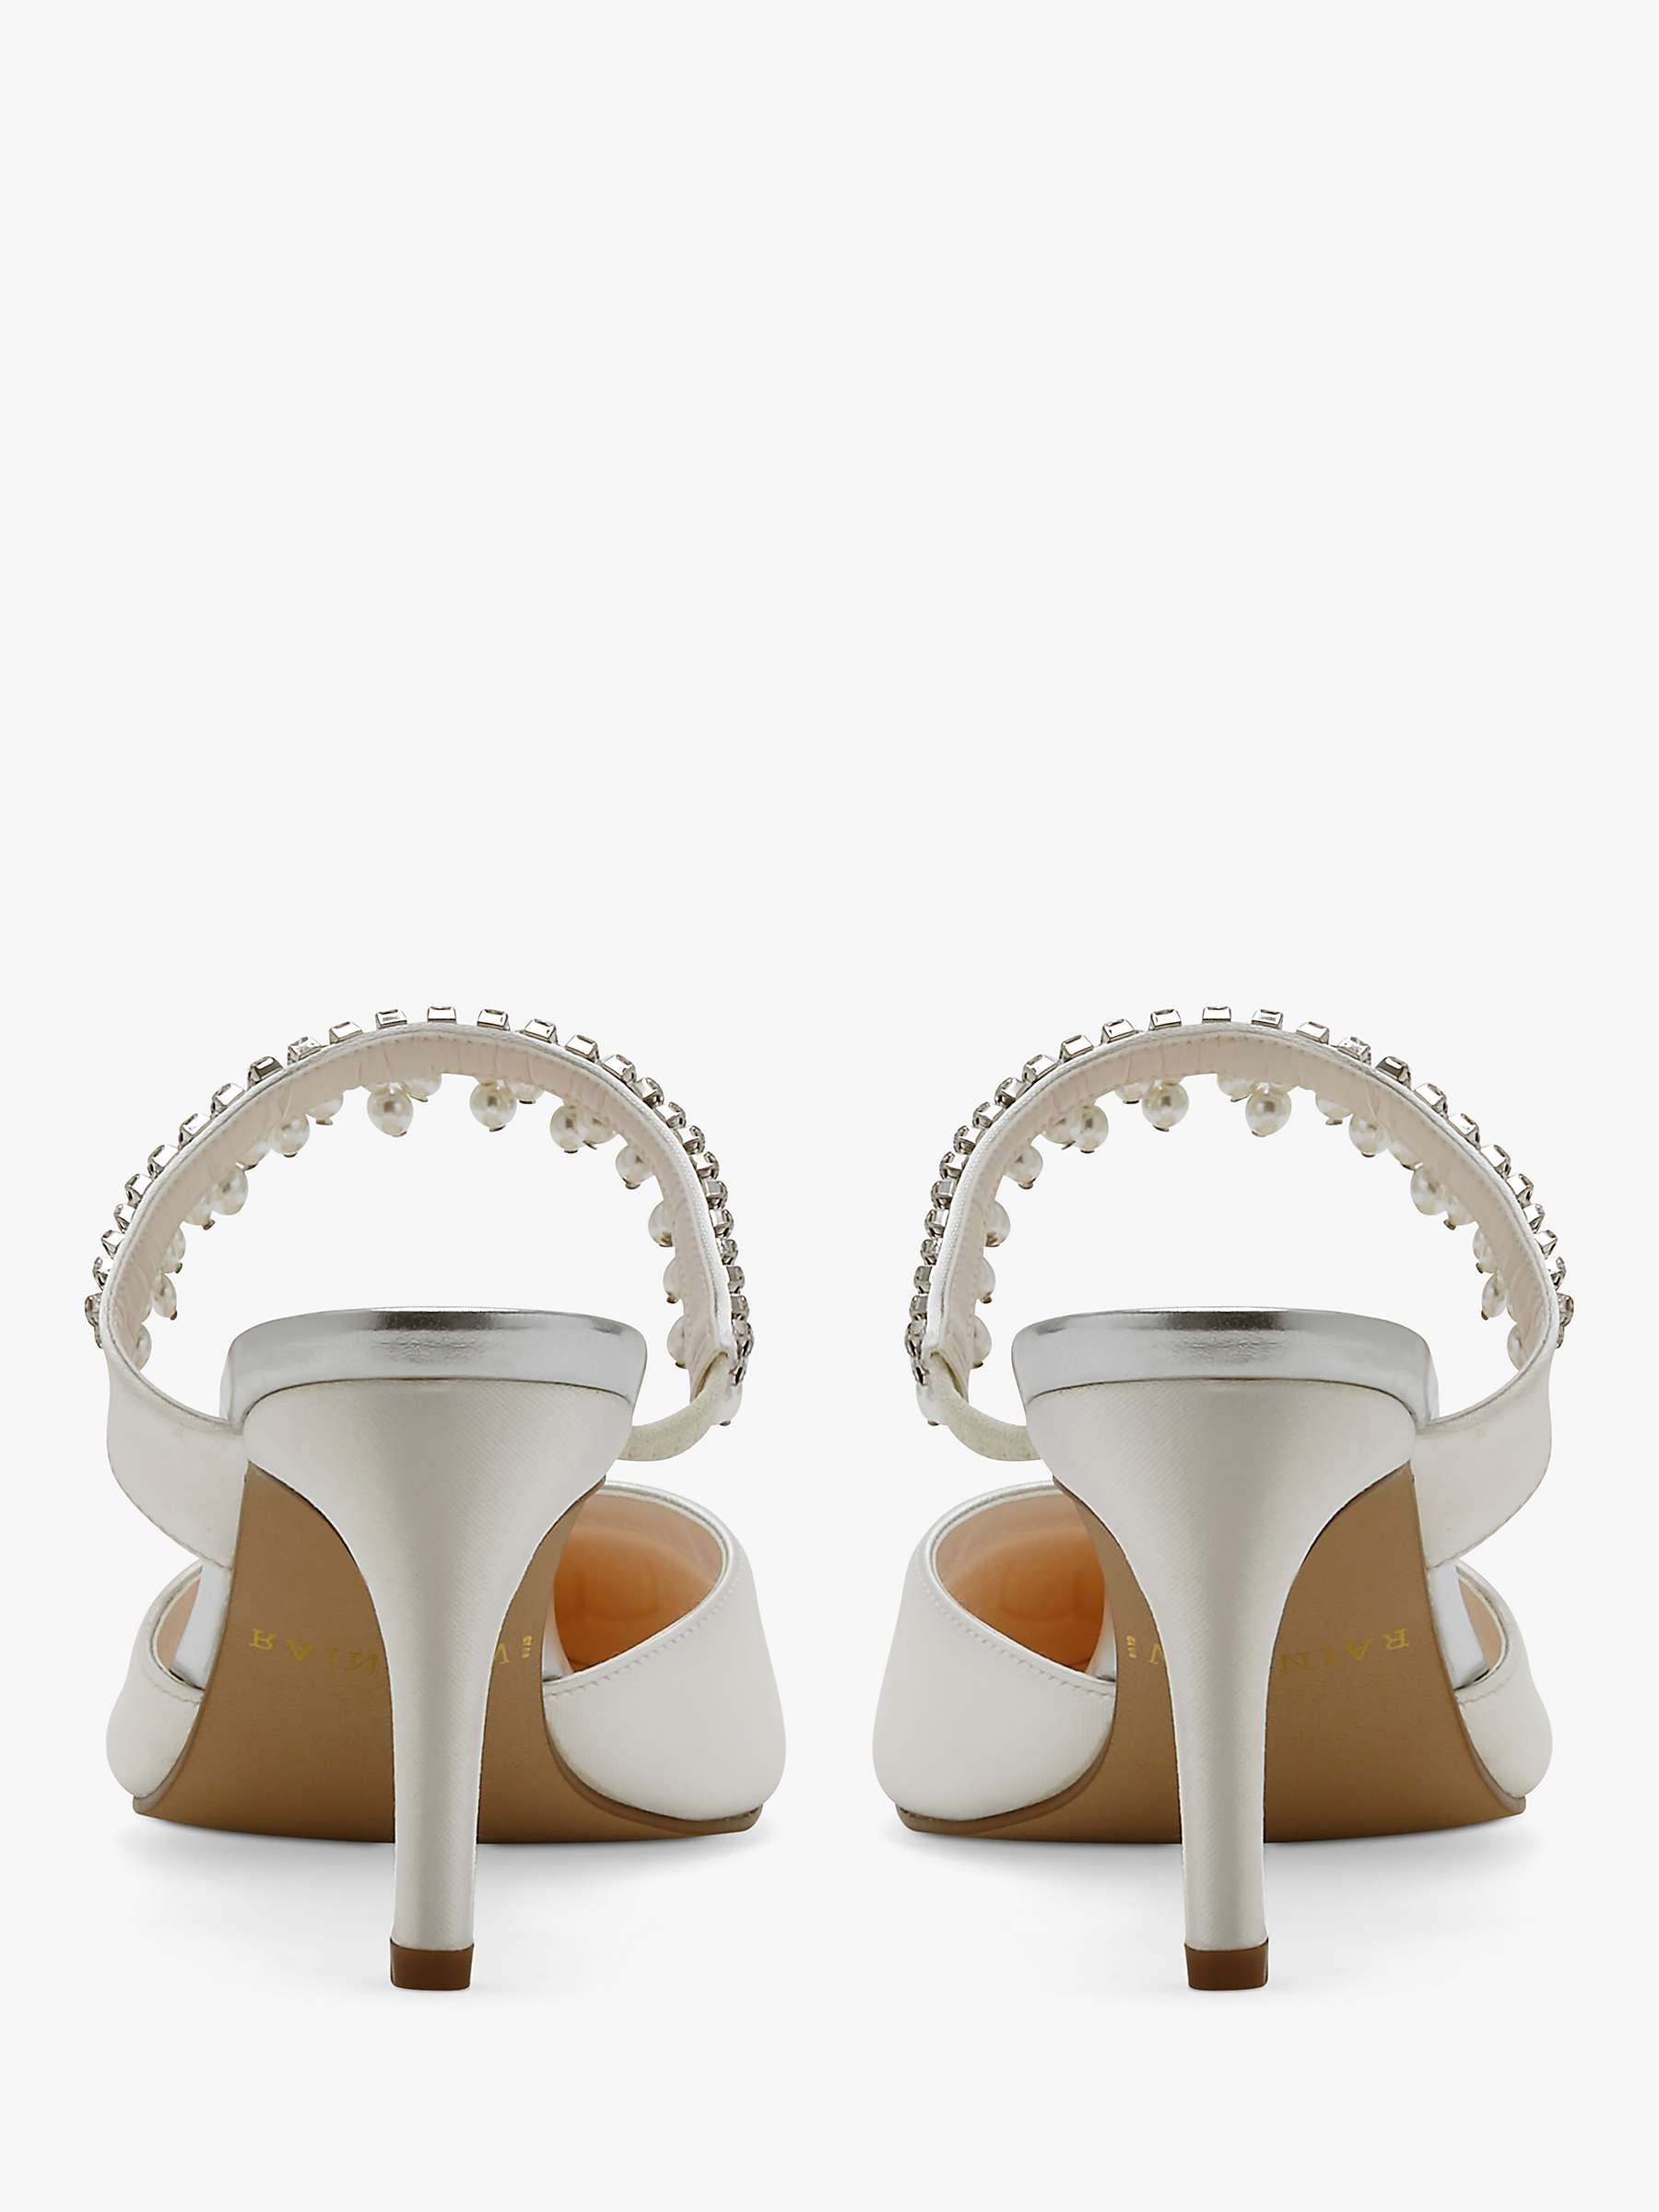 Buy Rainbow Club Amyla Satin Pearl Detail Mules, Ivory Satin Online at johnlewis.com